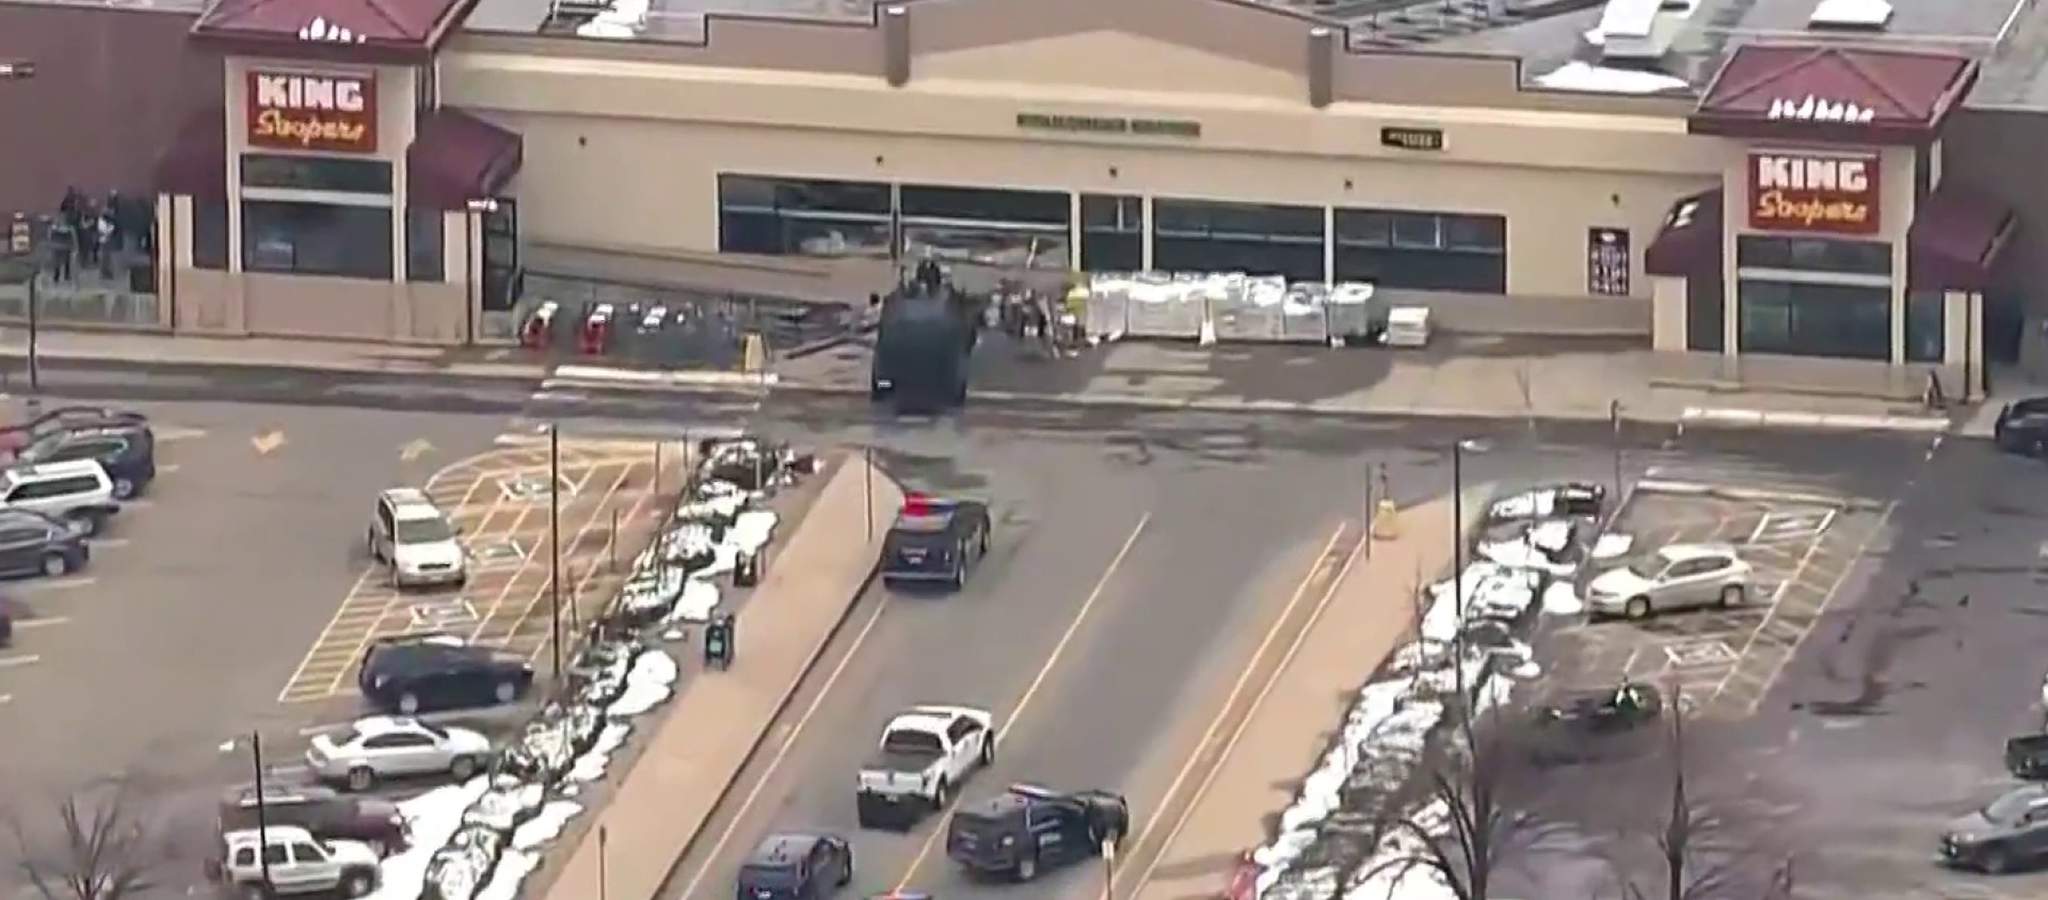 10 people, including ‘heroic’ officer, killed in Colorado supermarket